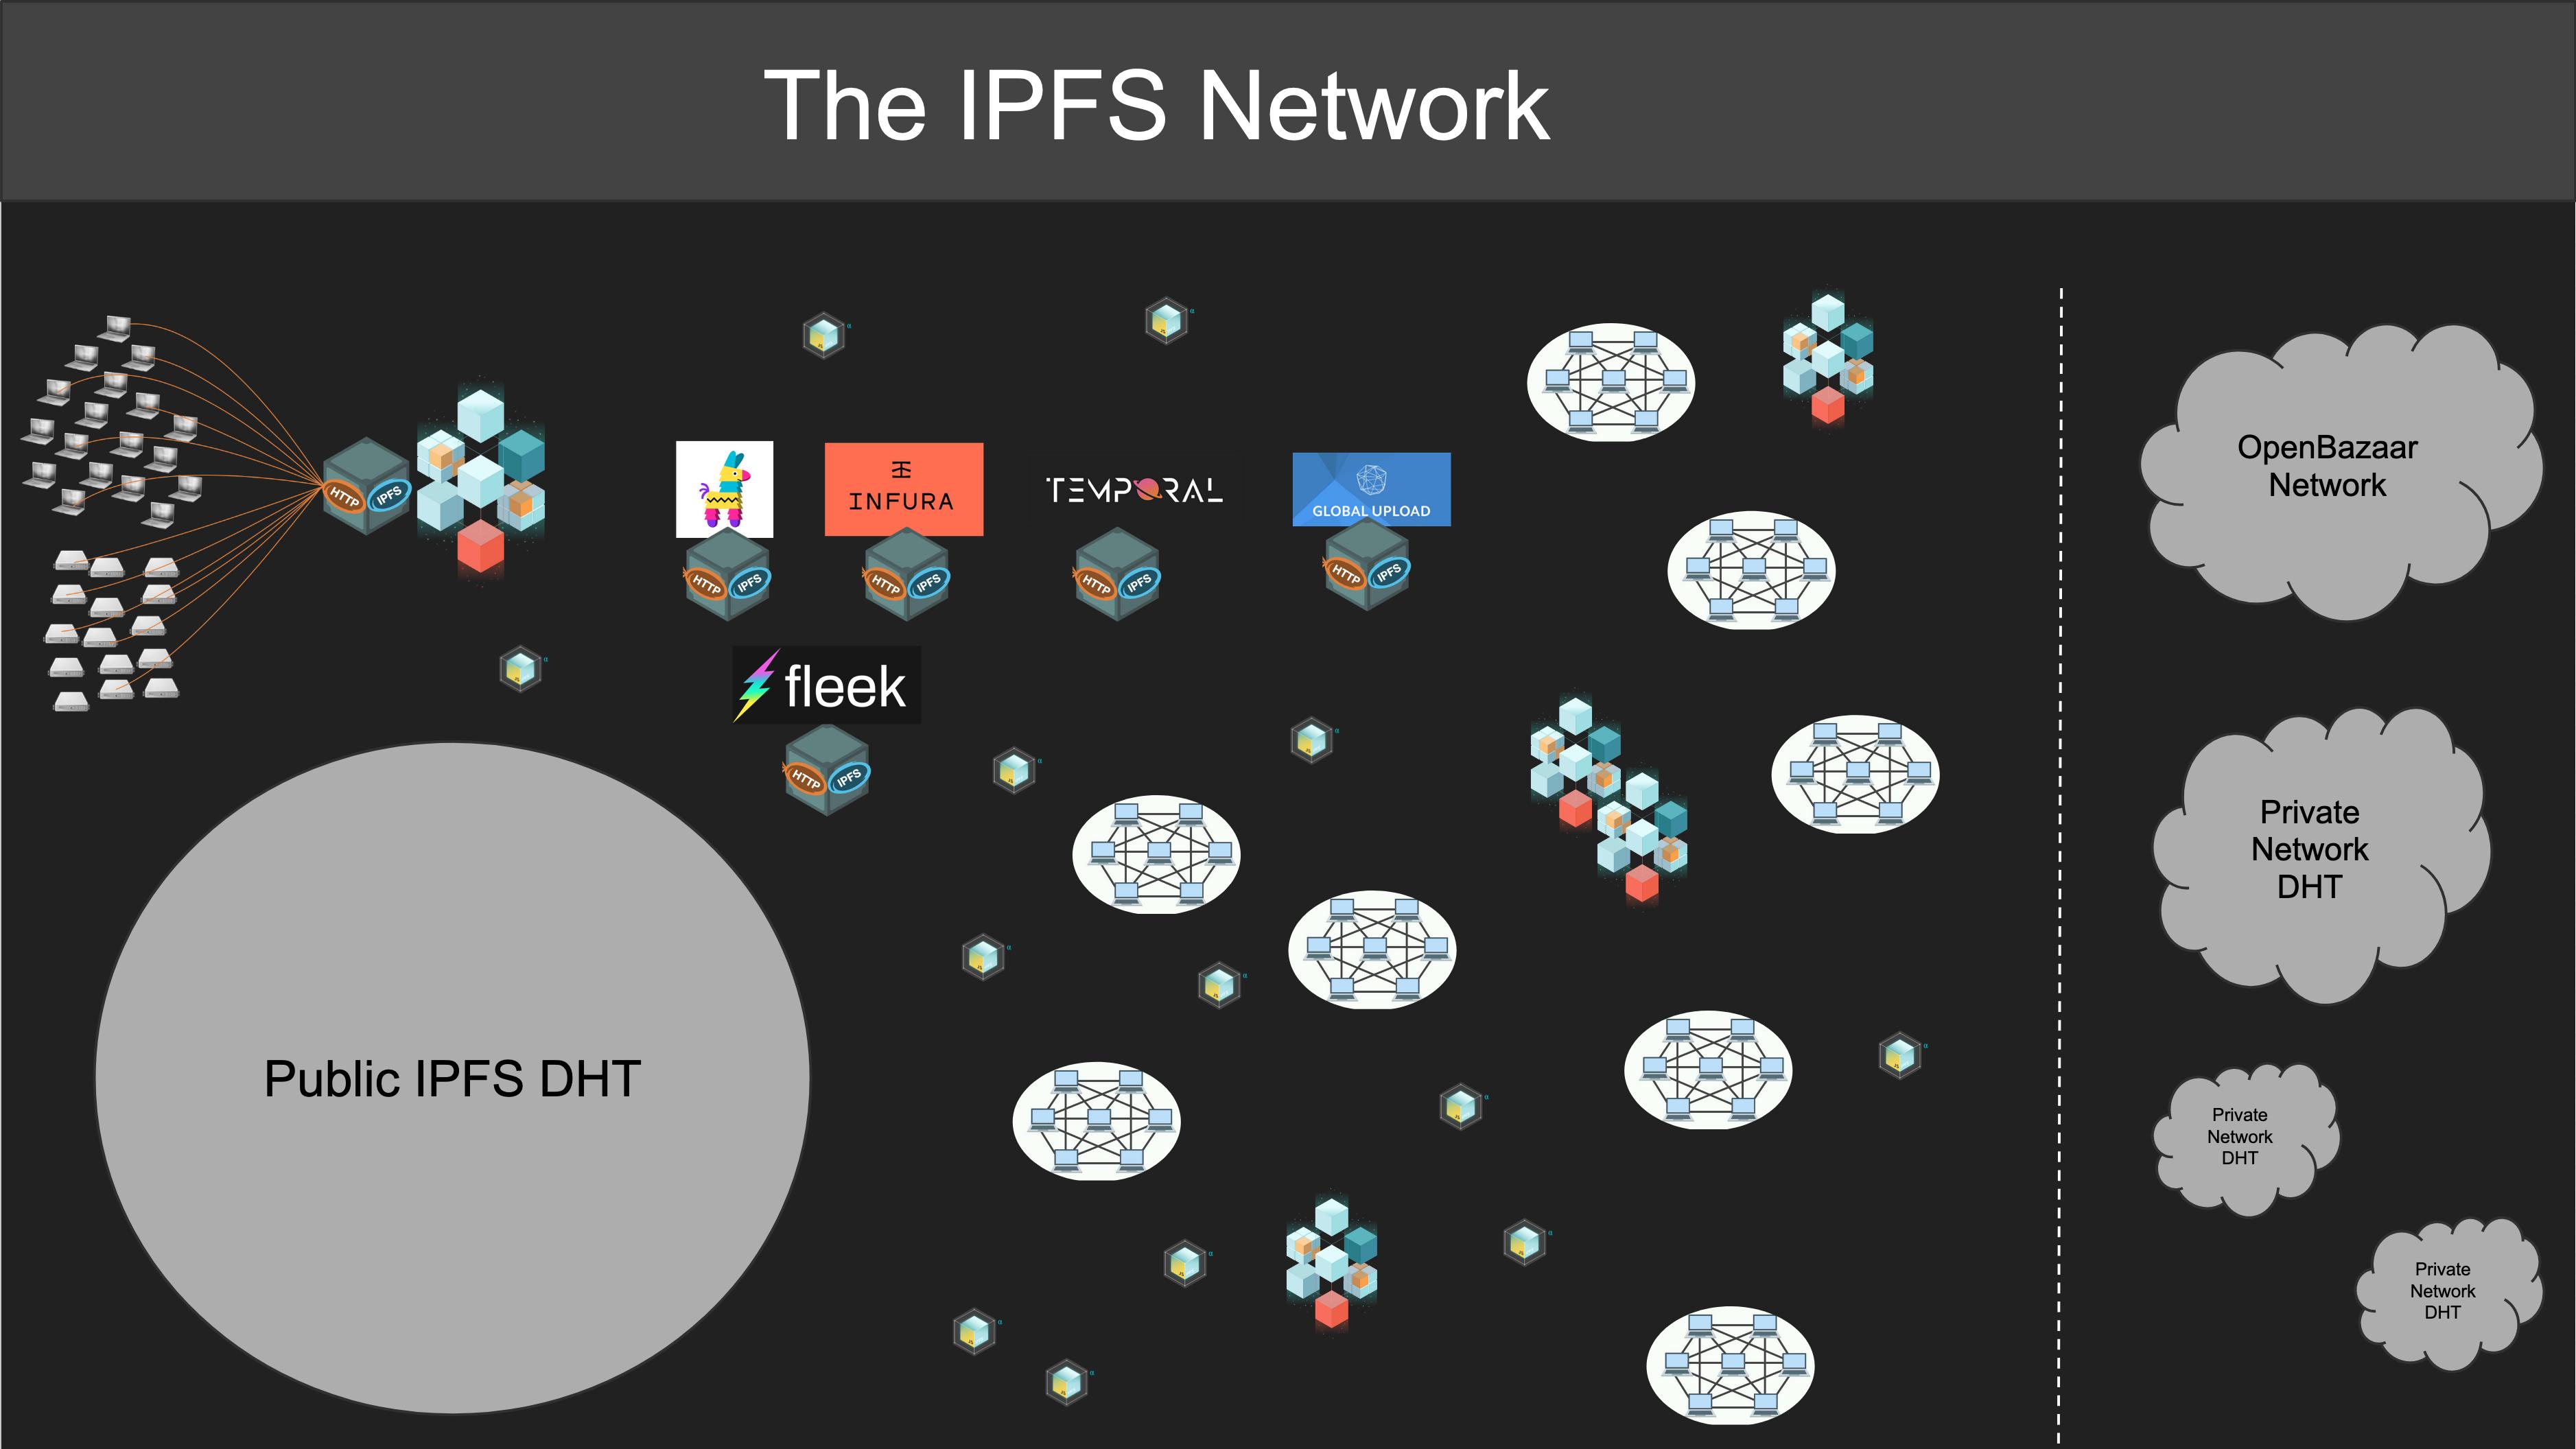 Many ways of being in the IPFS Network